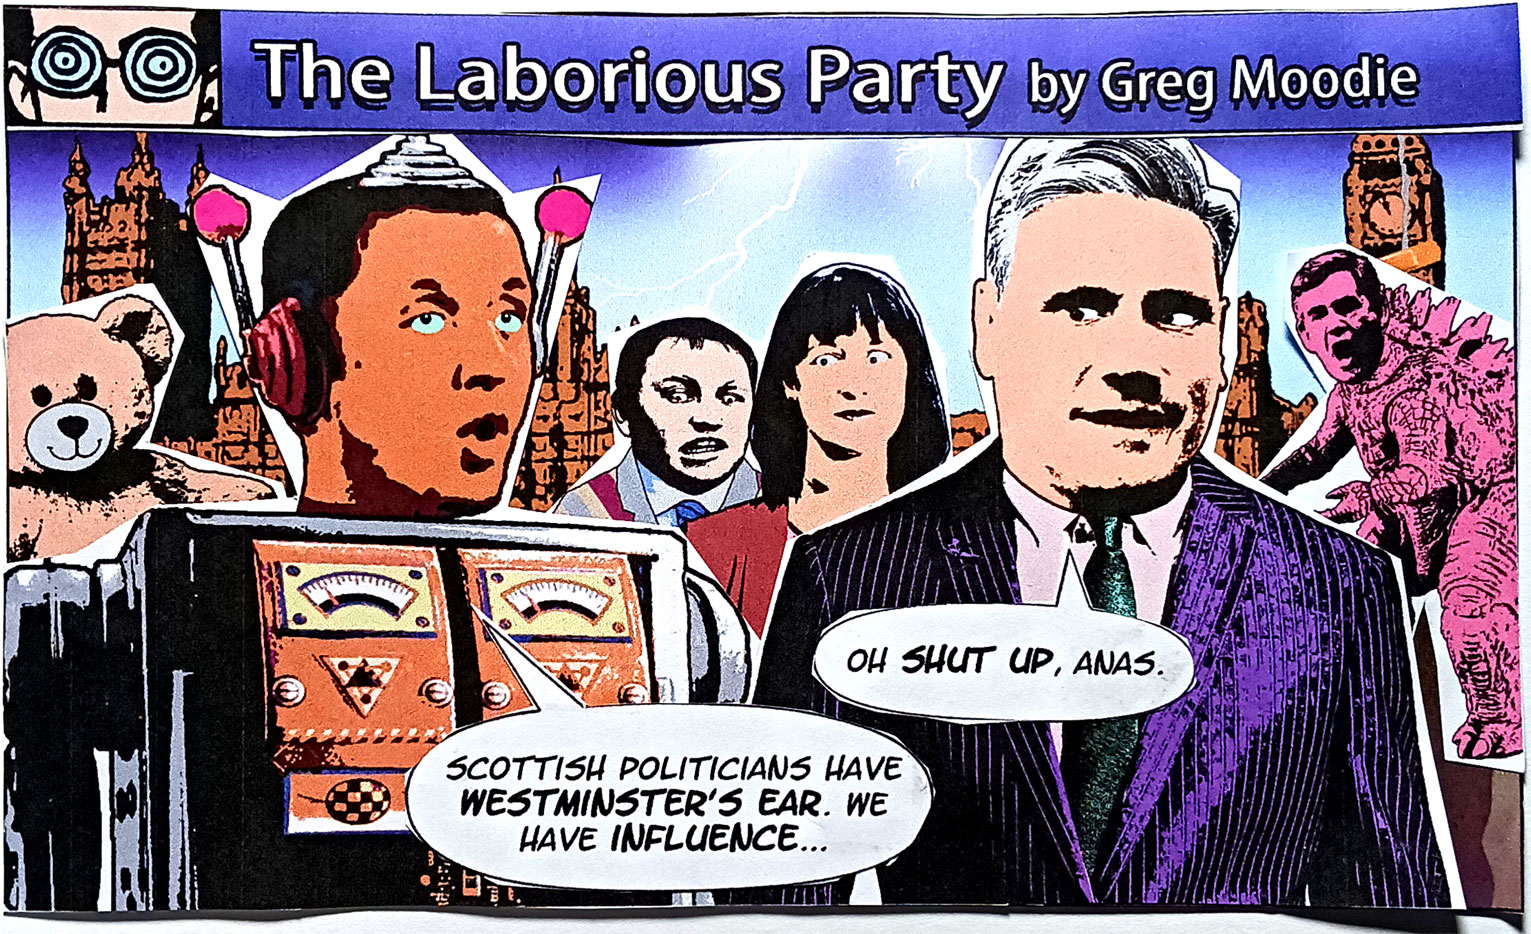 The Laborious Party